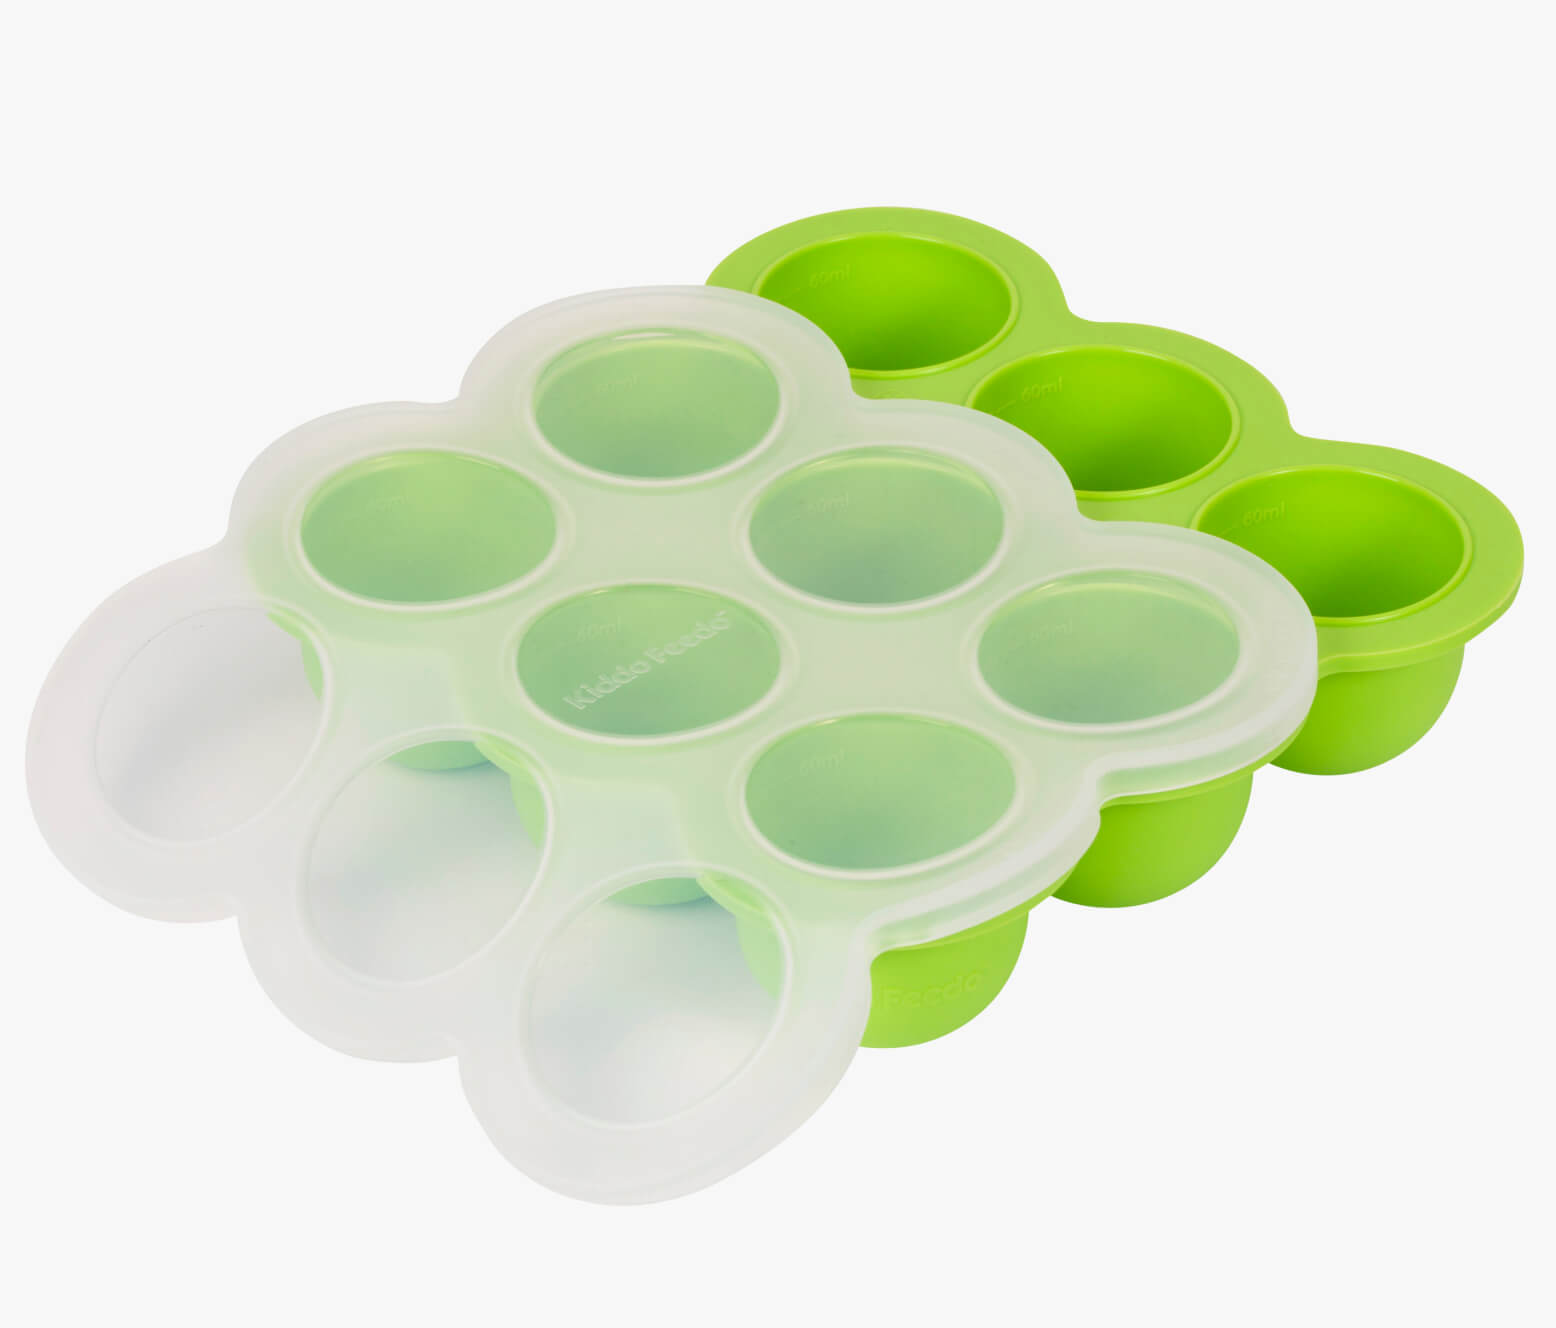 If You Make Your Own Baby Food, You Need This Silicone Freezer Tray